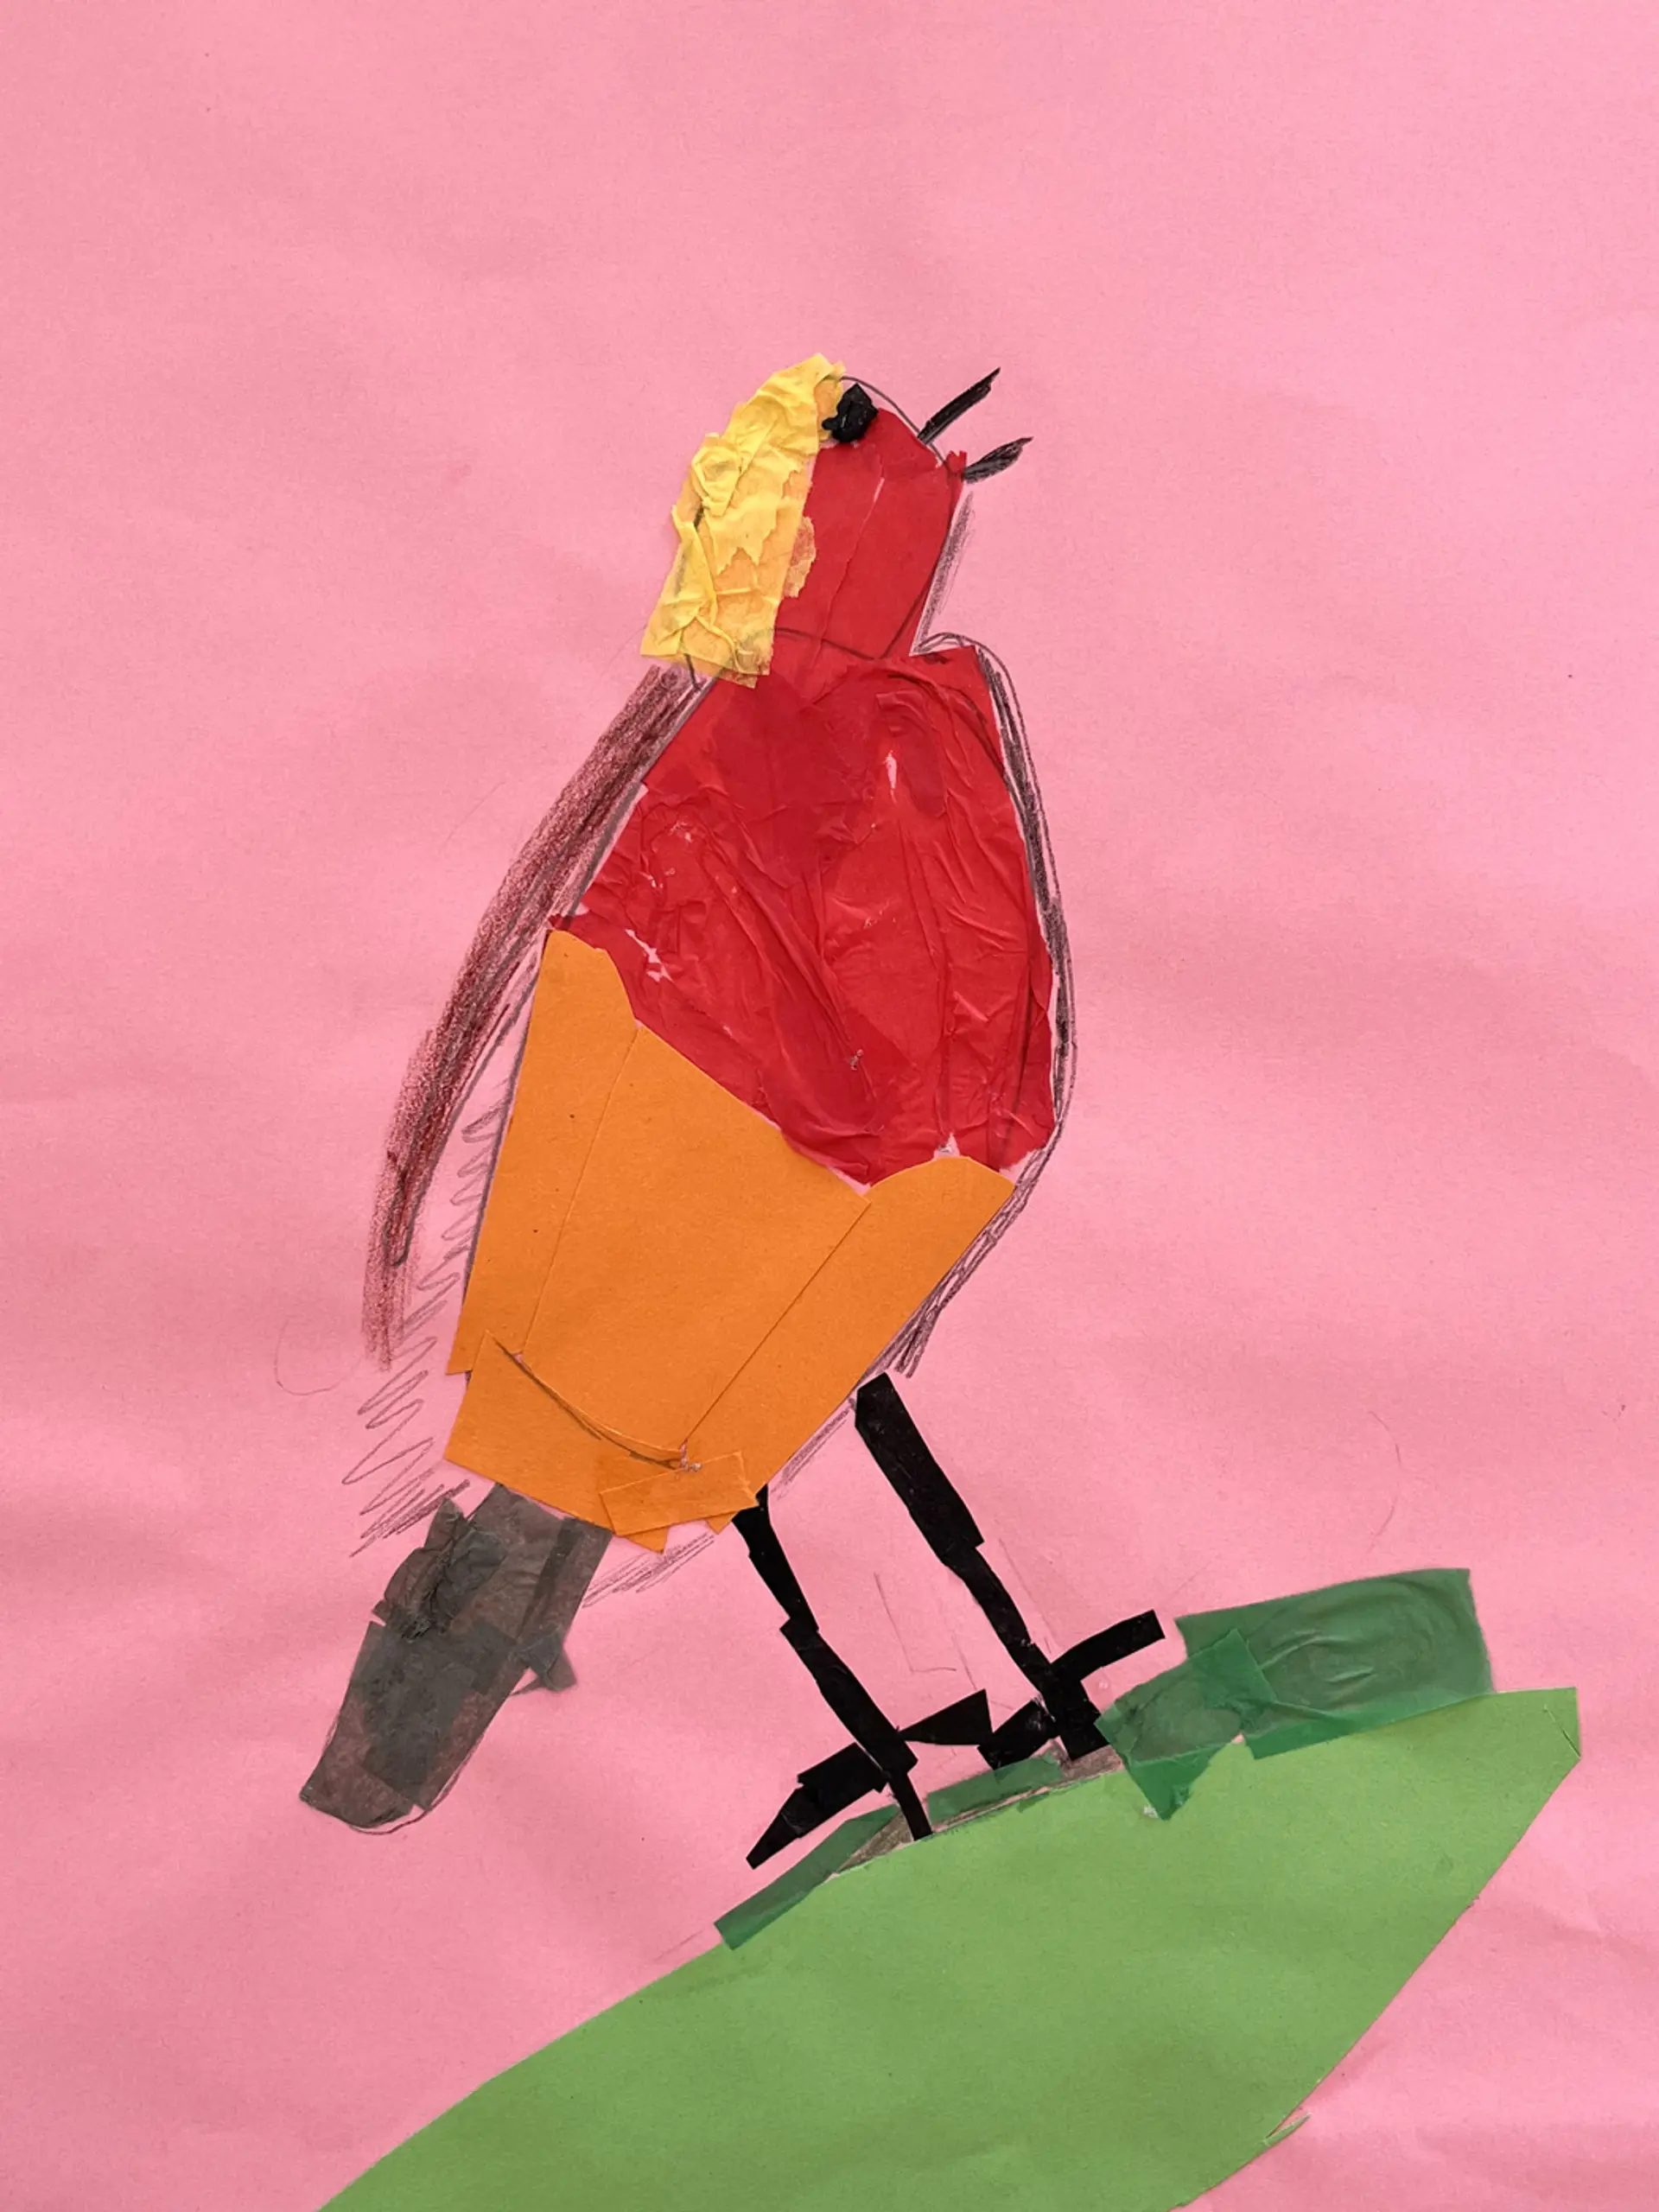 A collage of a robin on a pink background. The artist has used tissue paper for the collage and the robin is singing, standing on a green branch. 